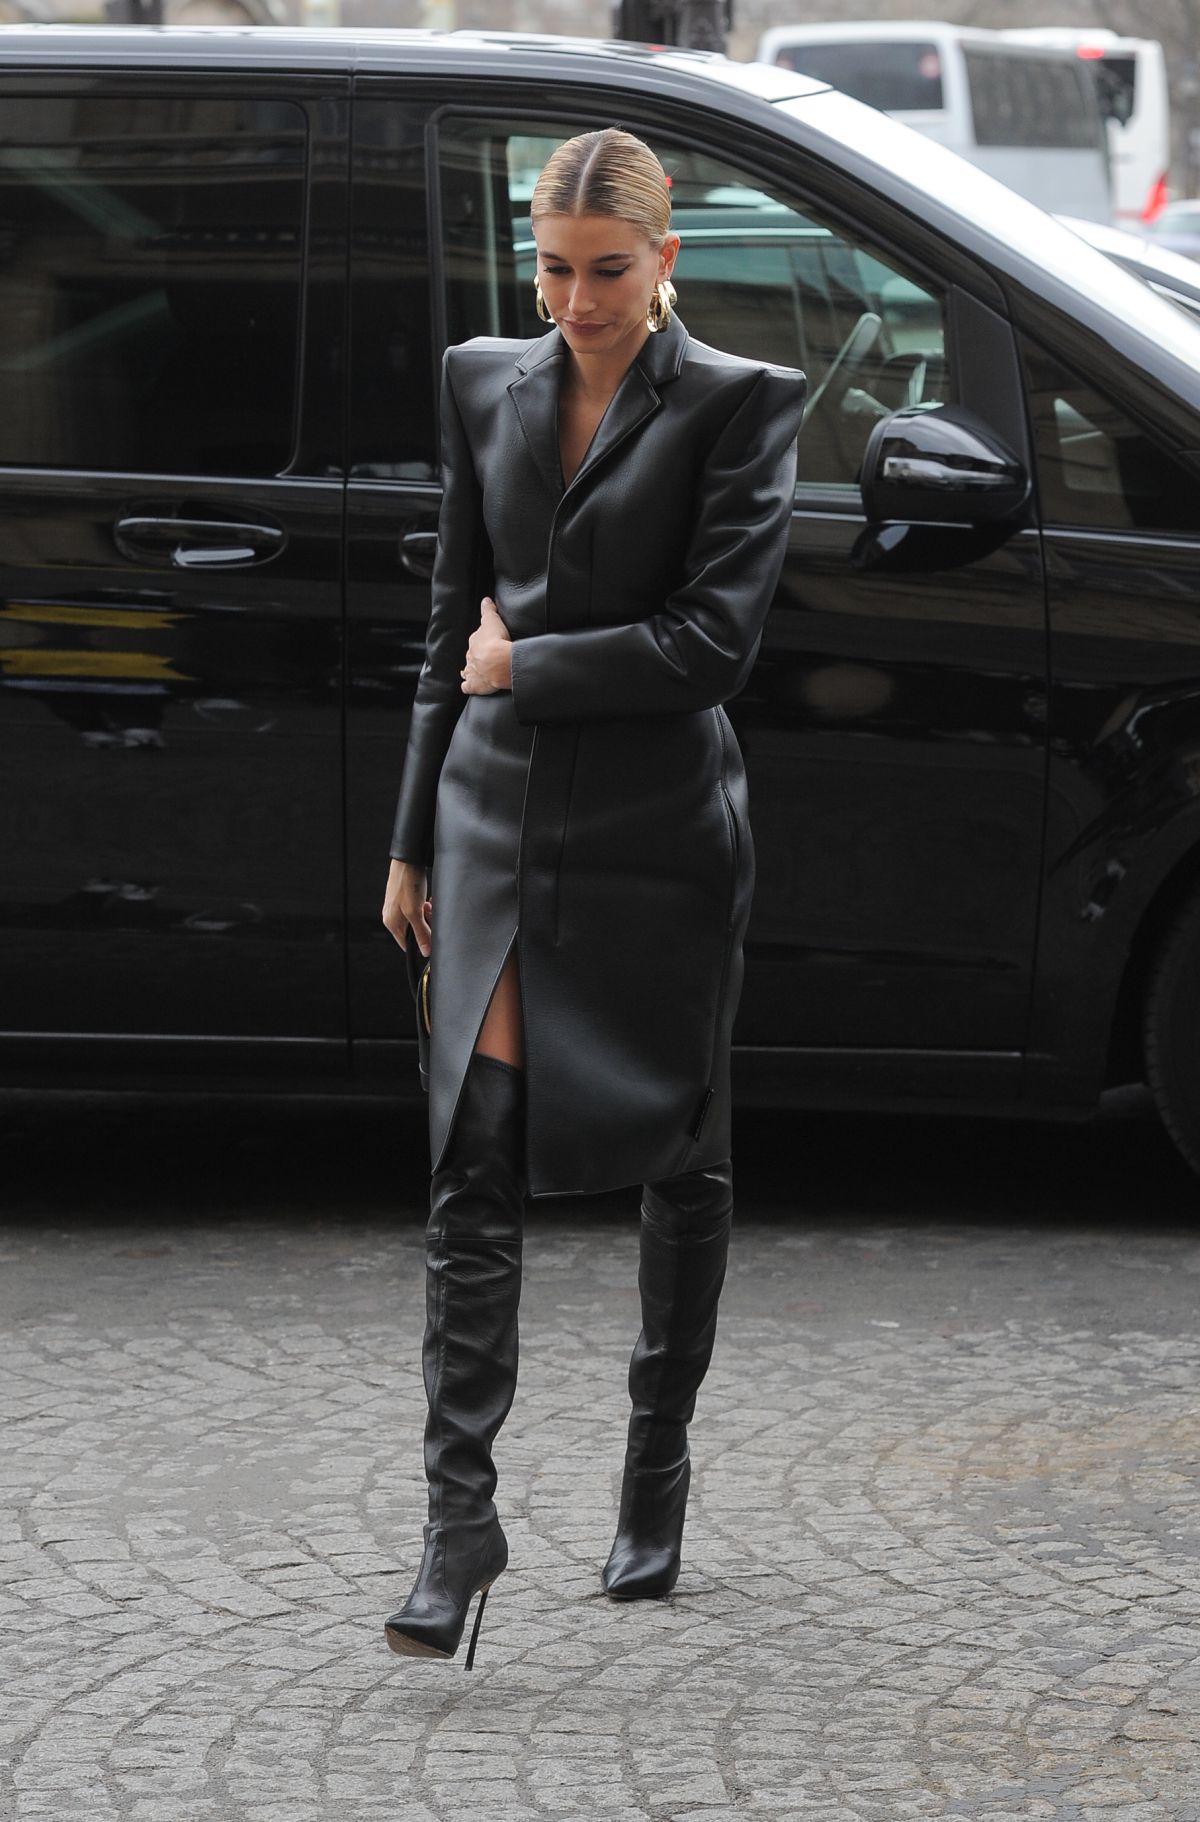 hailey-bieber-out-and-about-in-paris-03-03-2019-1.jpg